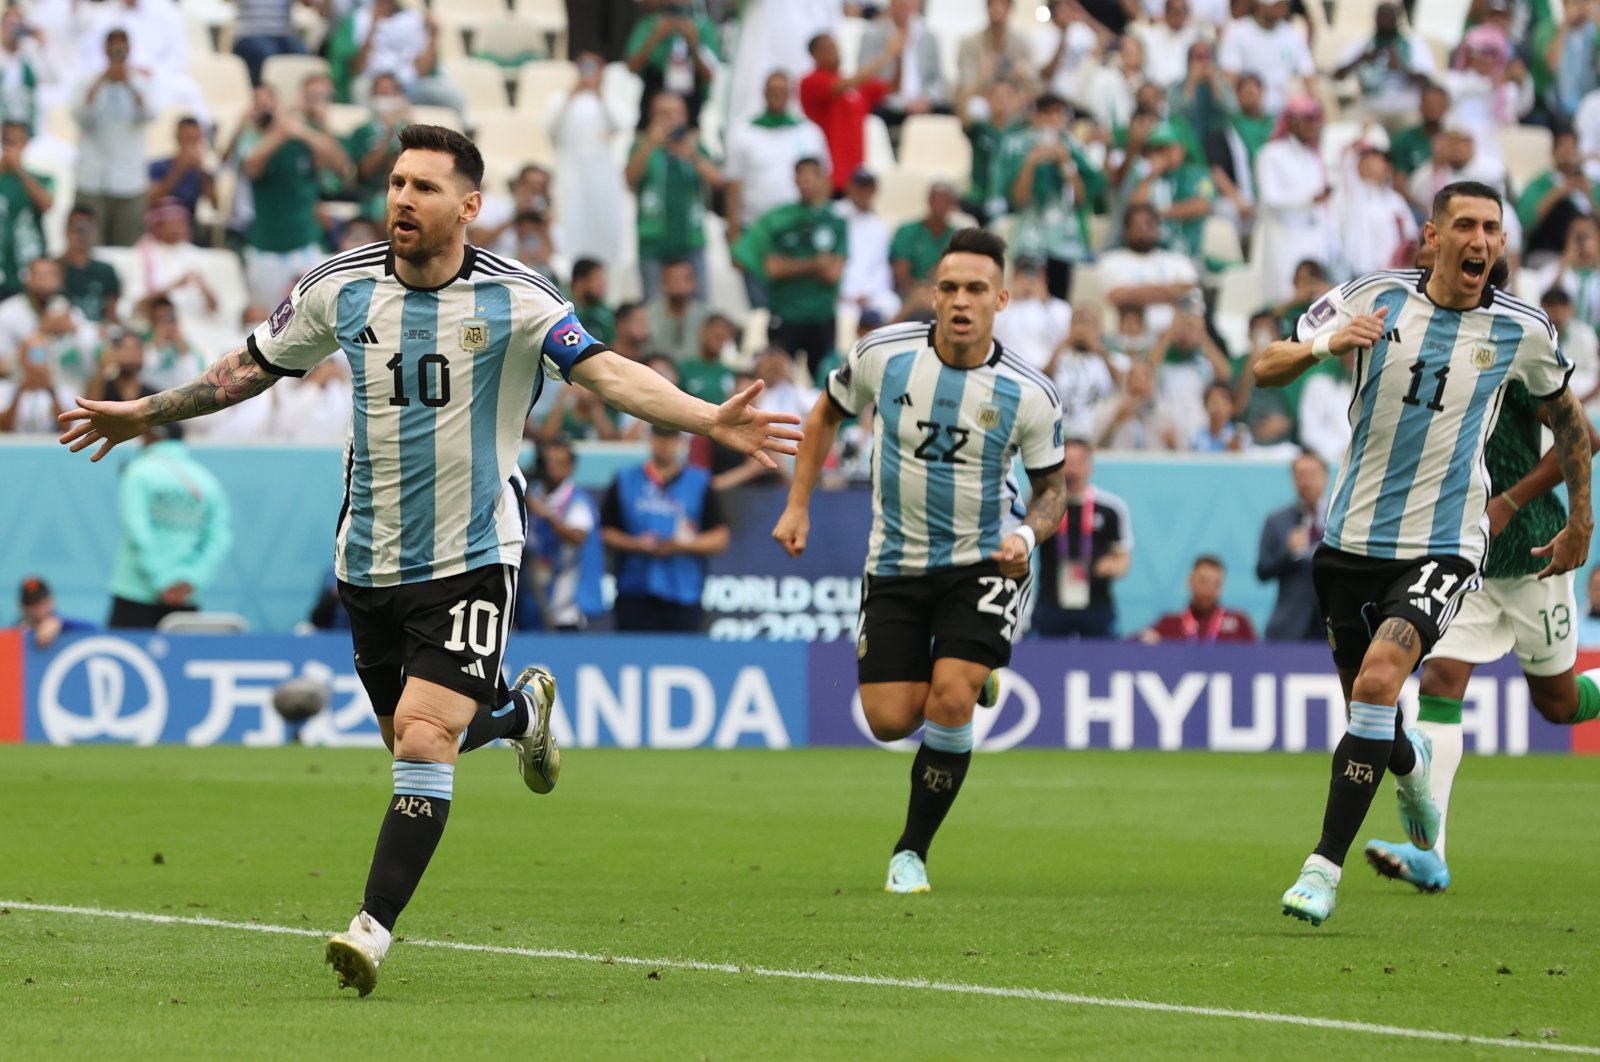 Argentina&#039;s Lionel Messi celebrates after scoring the 1-0 penalty goal in the FIFA World Cup 2022 Group C match between Argentina and Saudi Arabia at Lusail Stadium, Lusail, Qatar, Nov. 22, 2022. (EPA Photo)